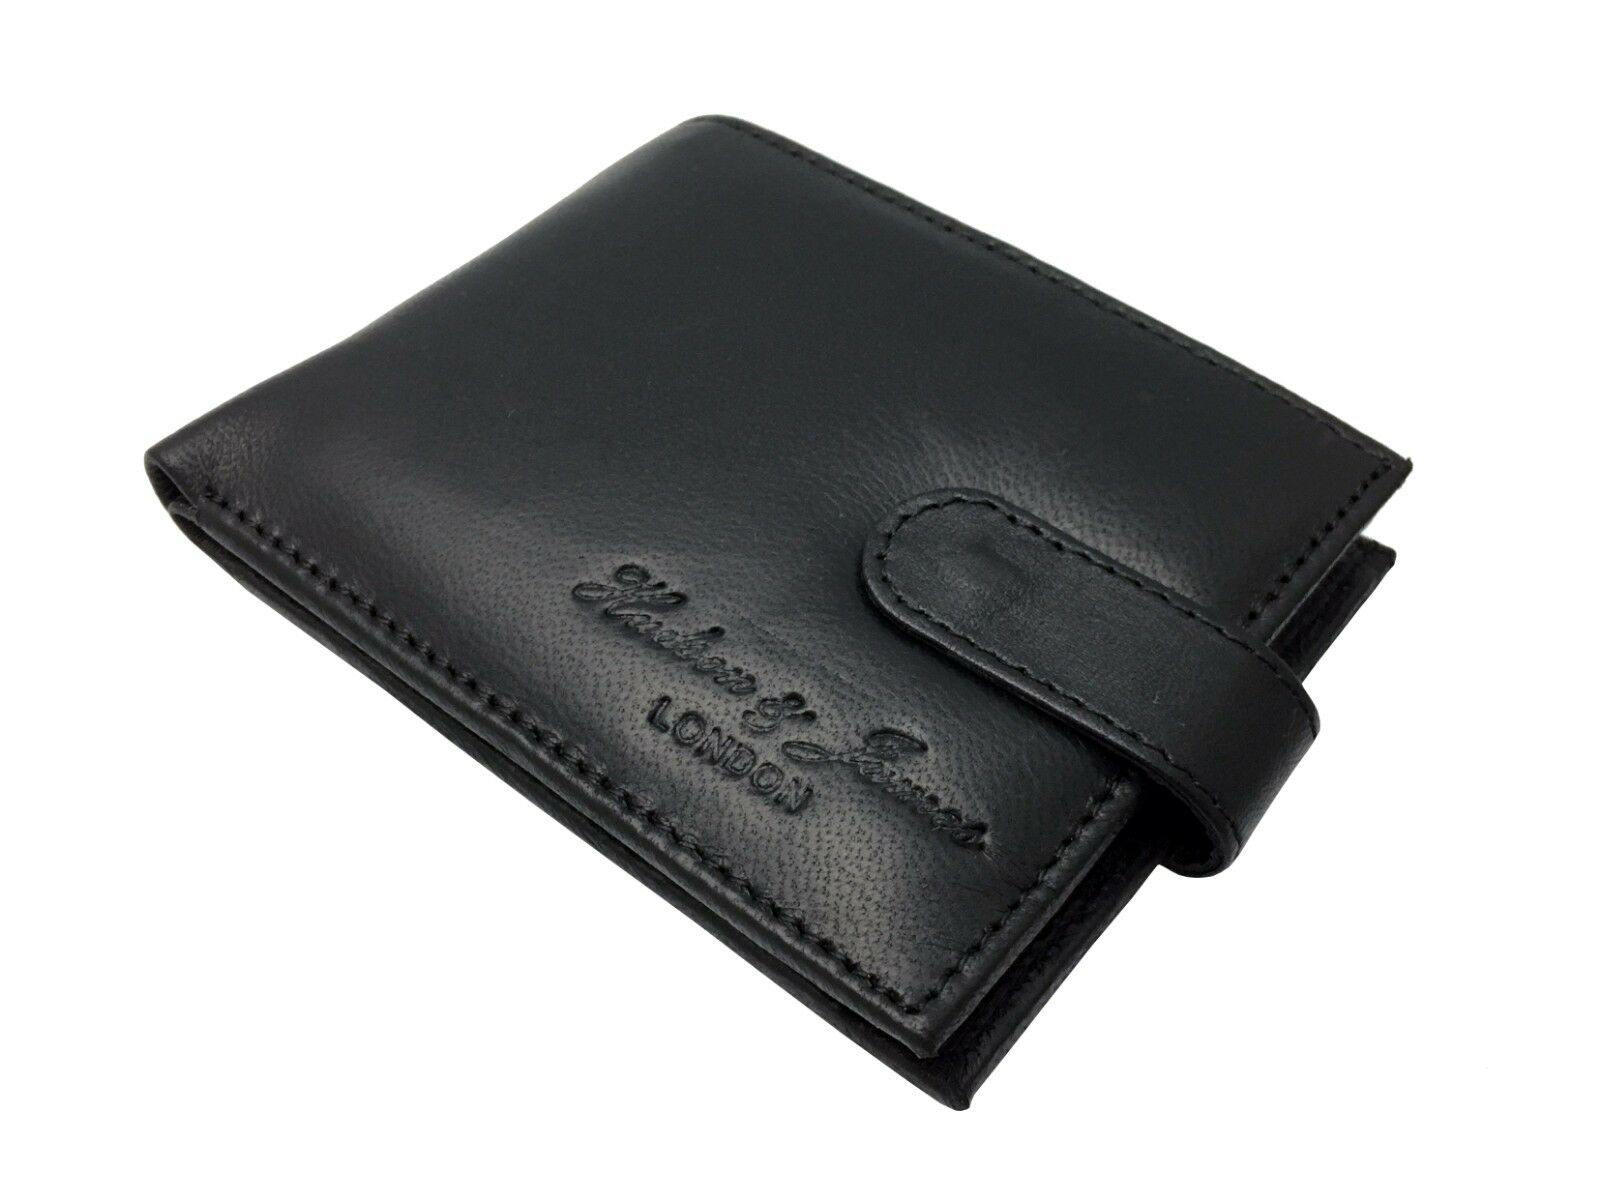 Contact'S Genuine Leather Clutch Bag for Men Password Design Casual Hand Wallet Bags Male Long Purse